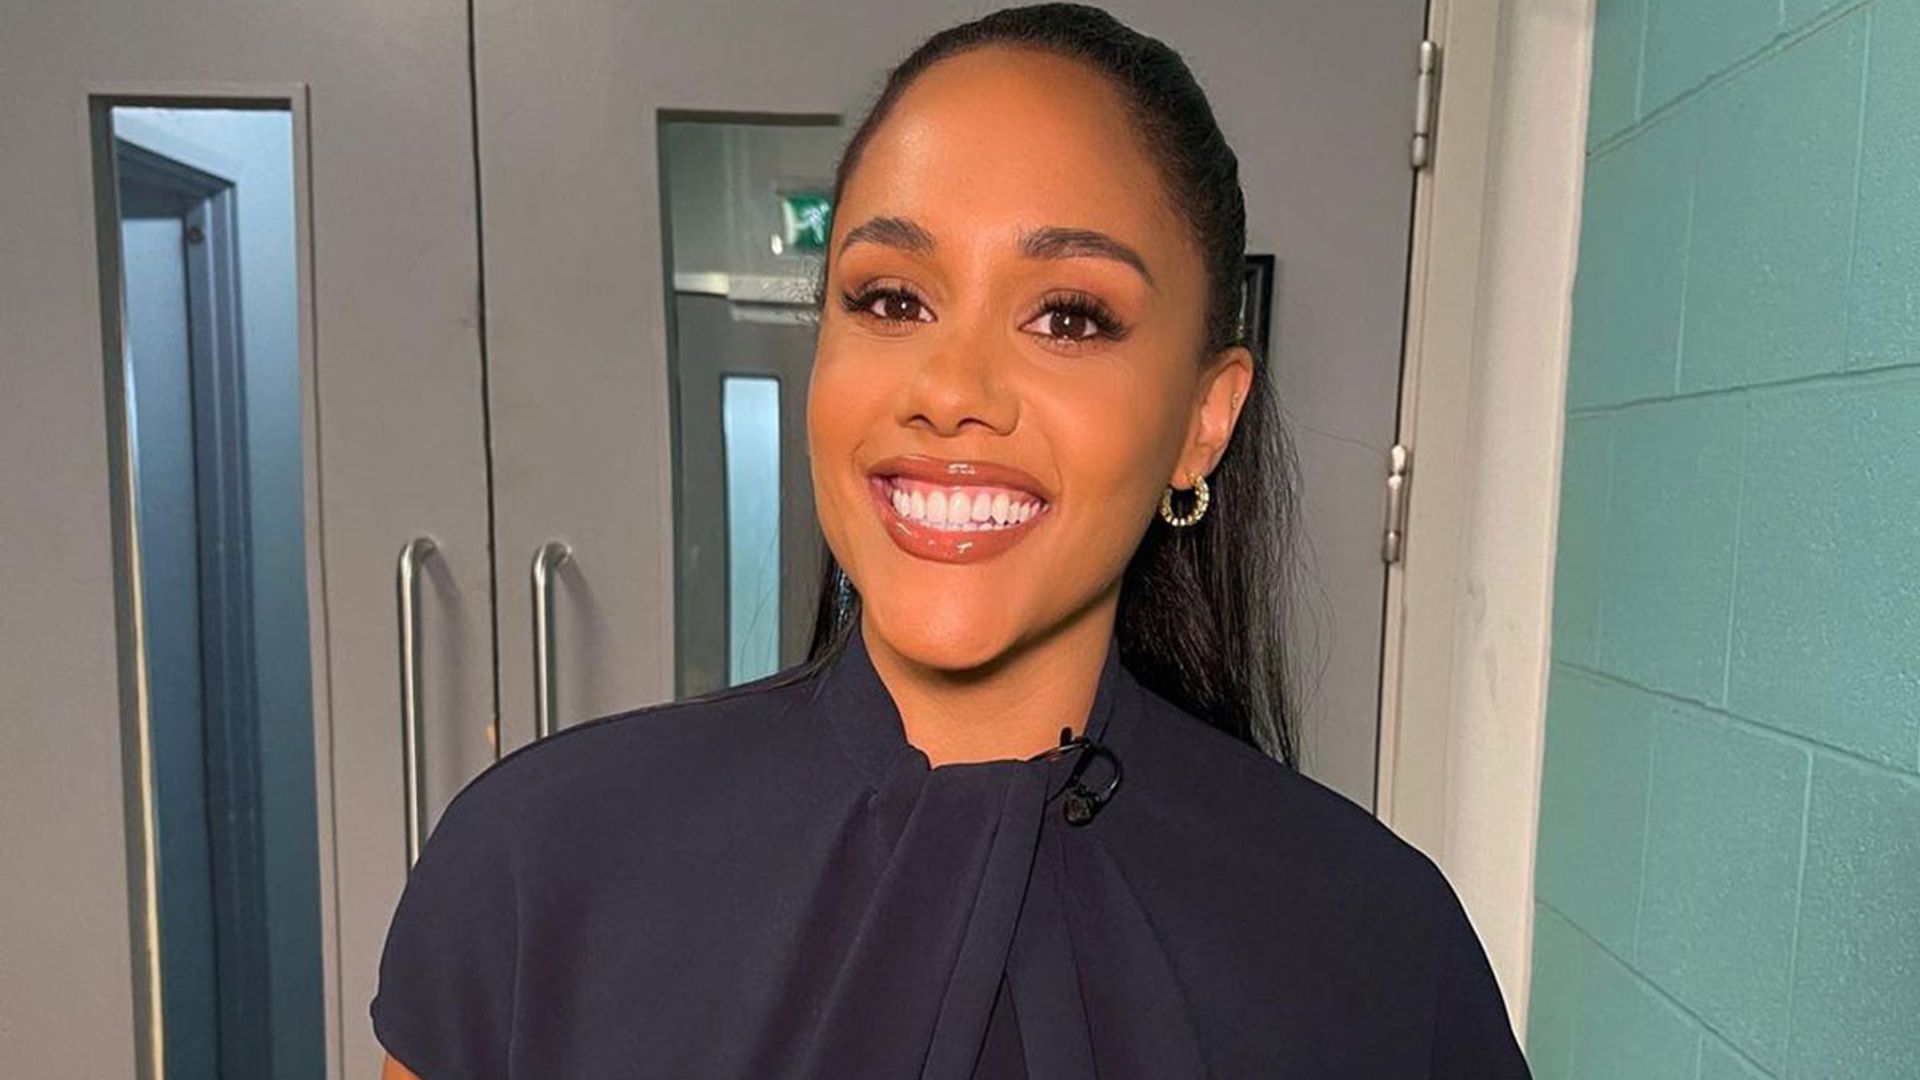 Alex Scott dials up the glam at Tokyo Olympics with chic black jumpsuit